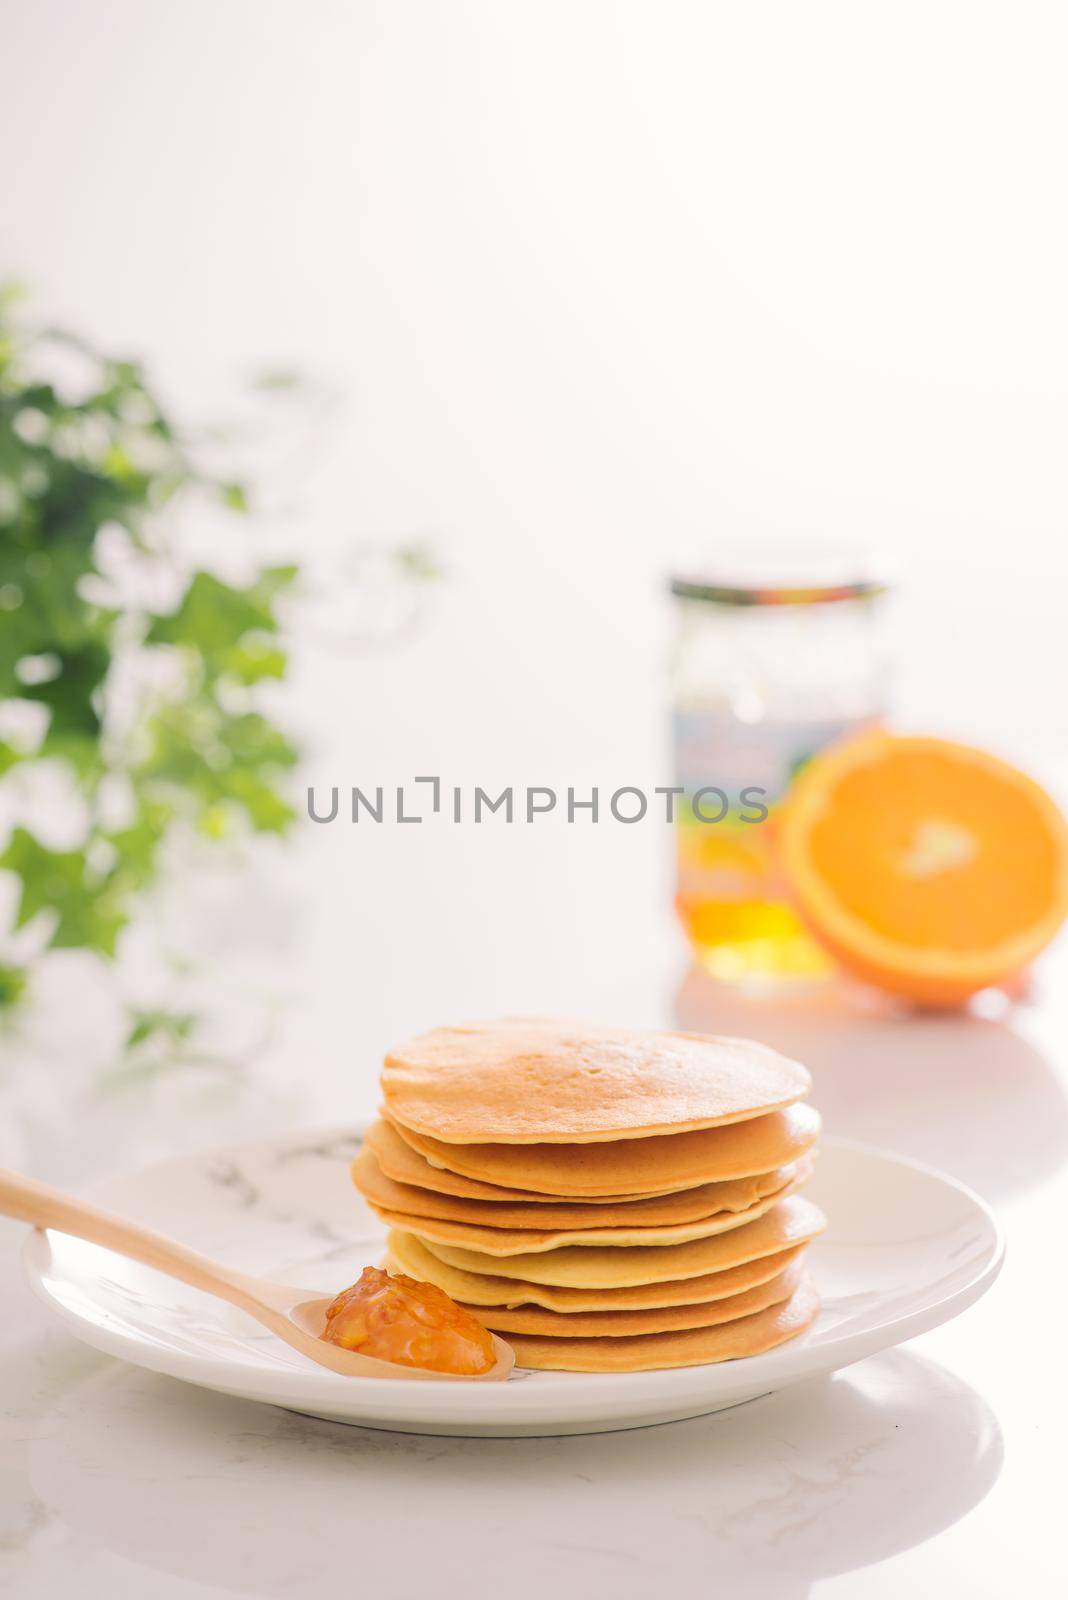 Stack of delicious pancakes on plate isolated on white